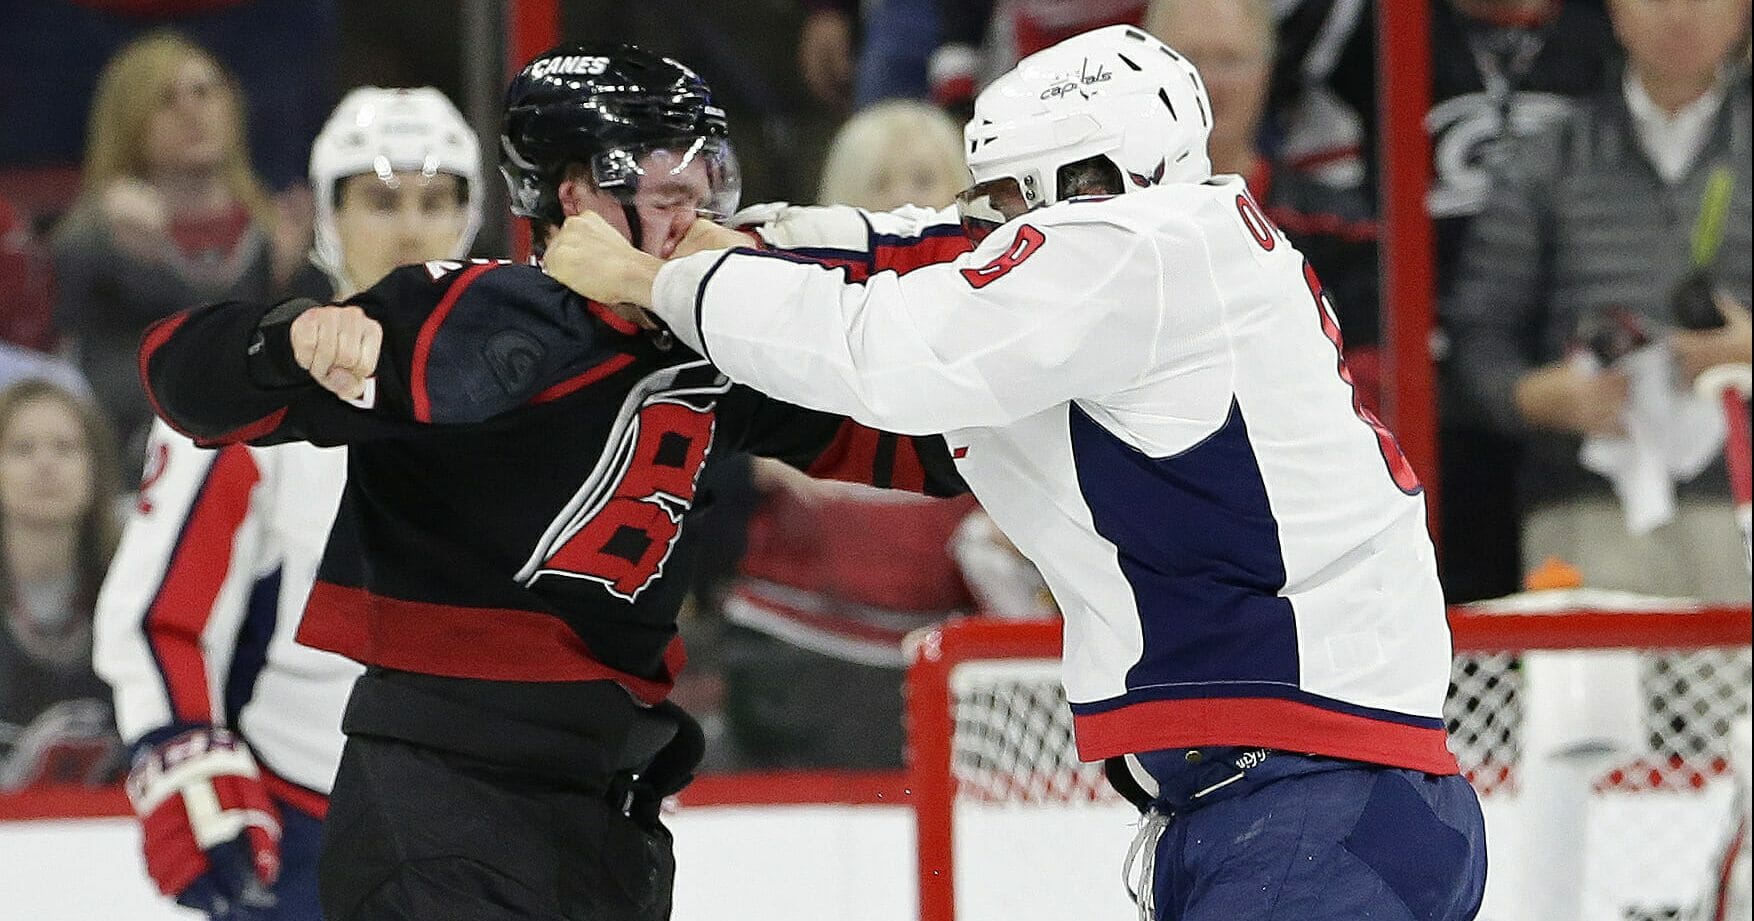 Washington Capitals' Alex Ovechkin, right, of Russia, punches Carolina Hurricanes' Andrei Svechnikov, also of Russia, during the first period of Game 3 of an NHL hockey first-round playoff series in Raleigh, N.C., Monday, April 15, 2019.